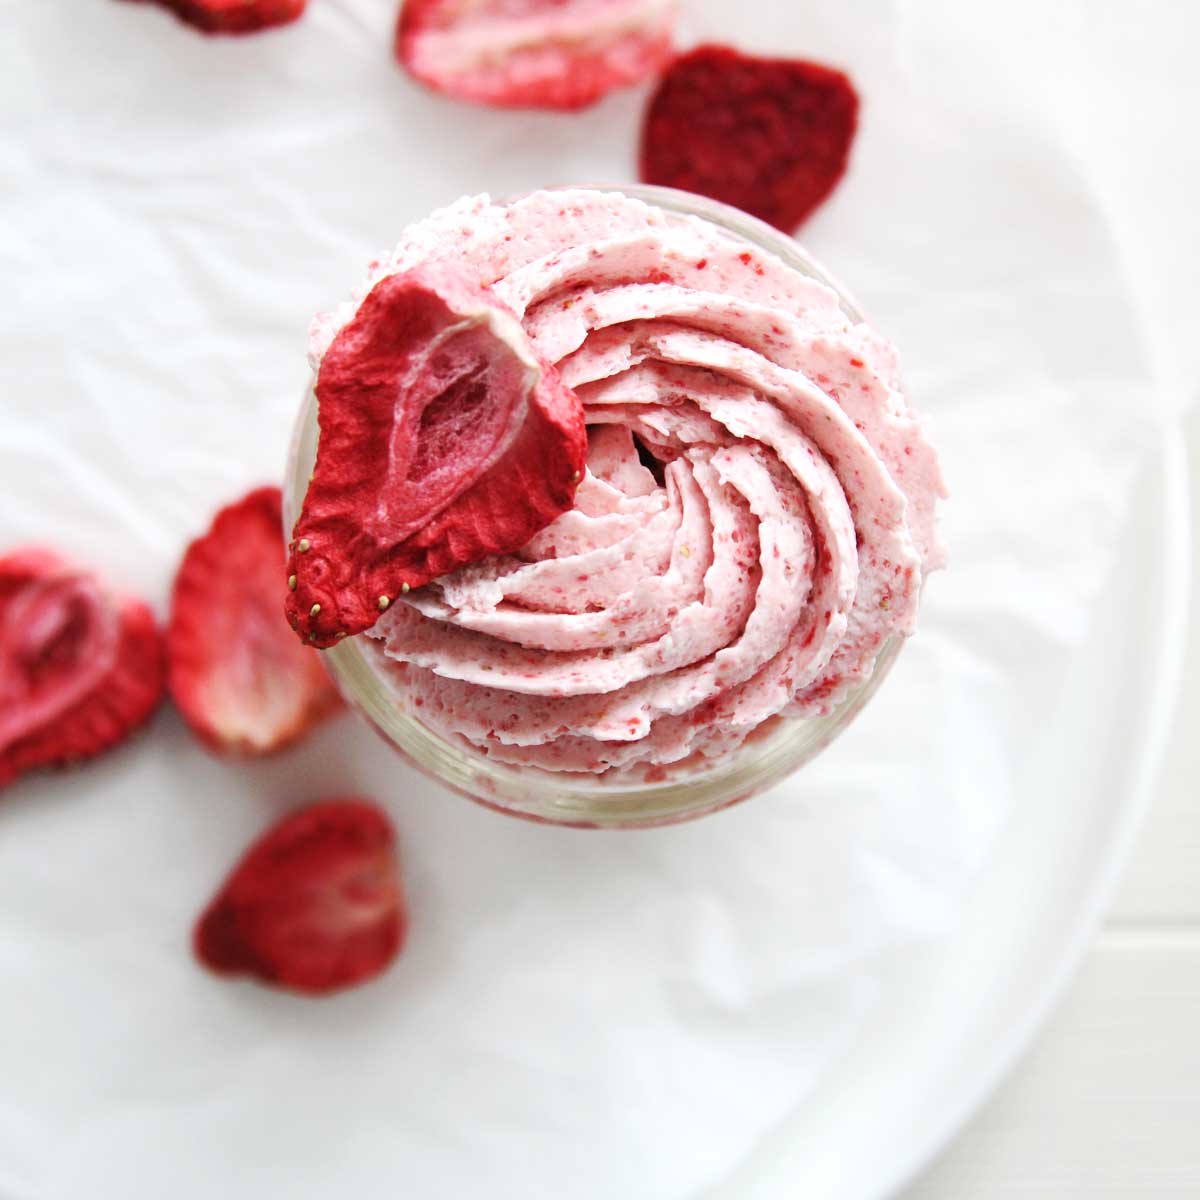 So Simple! Strawberry Whipped Cream (Chantilly Cream) Recipe - Peppermint Whipped Cream